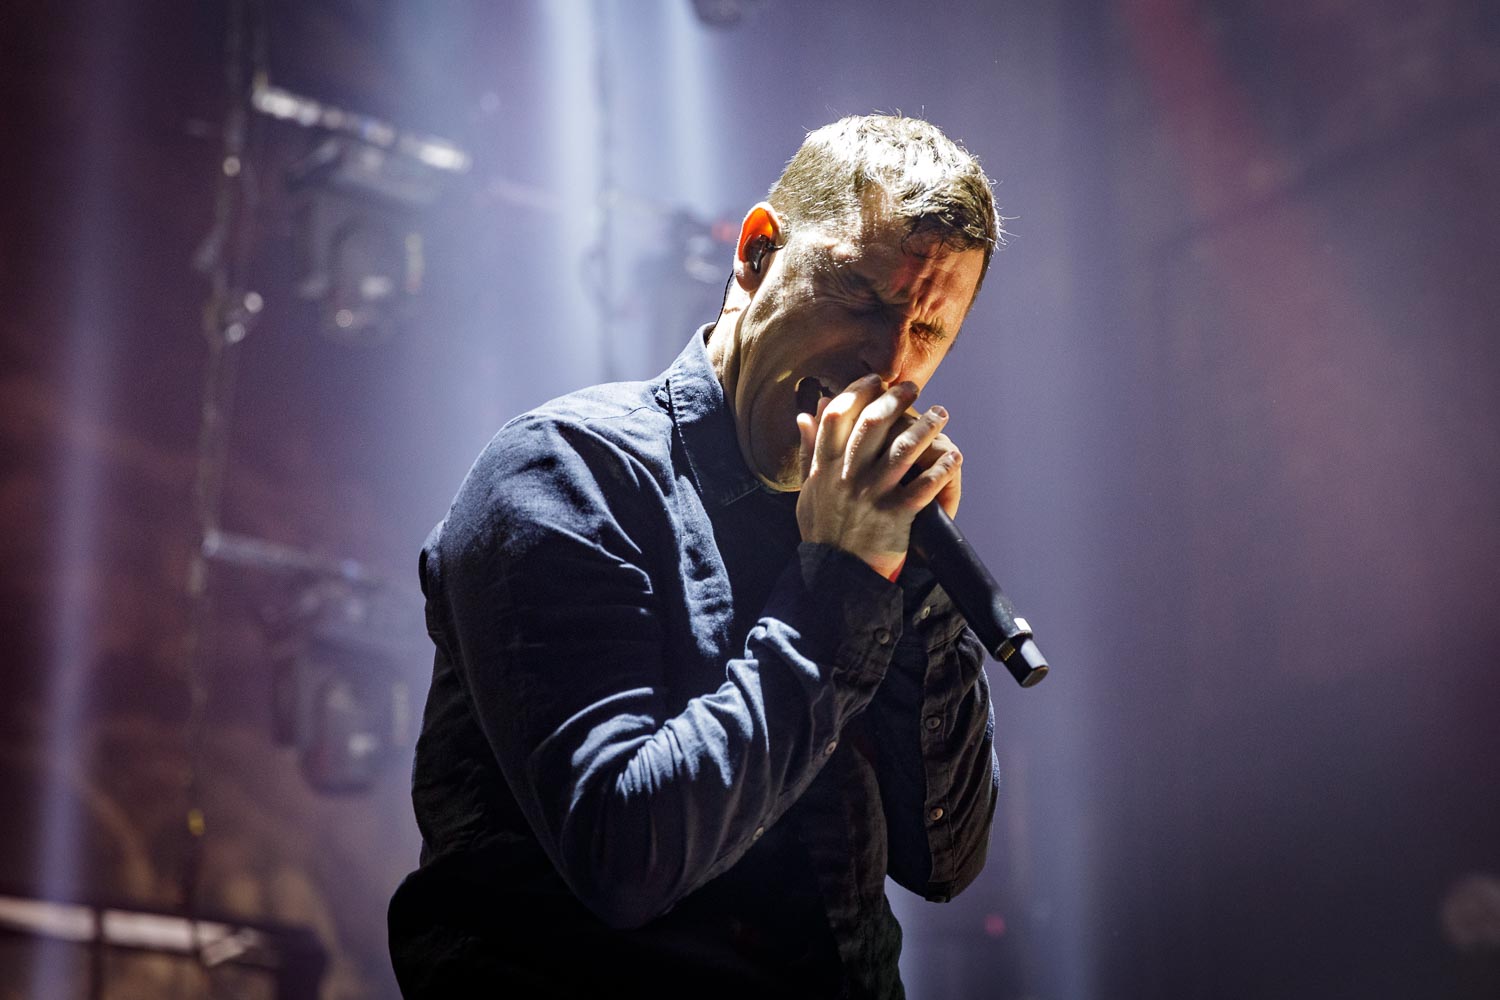  Parkway Drive live at the O2 Apollo in Manchester on January 29th 2019. ©Johann Wierzbicki | ROCKFLESH 